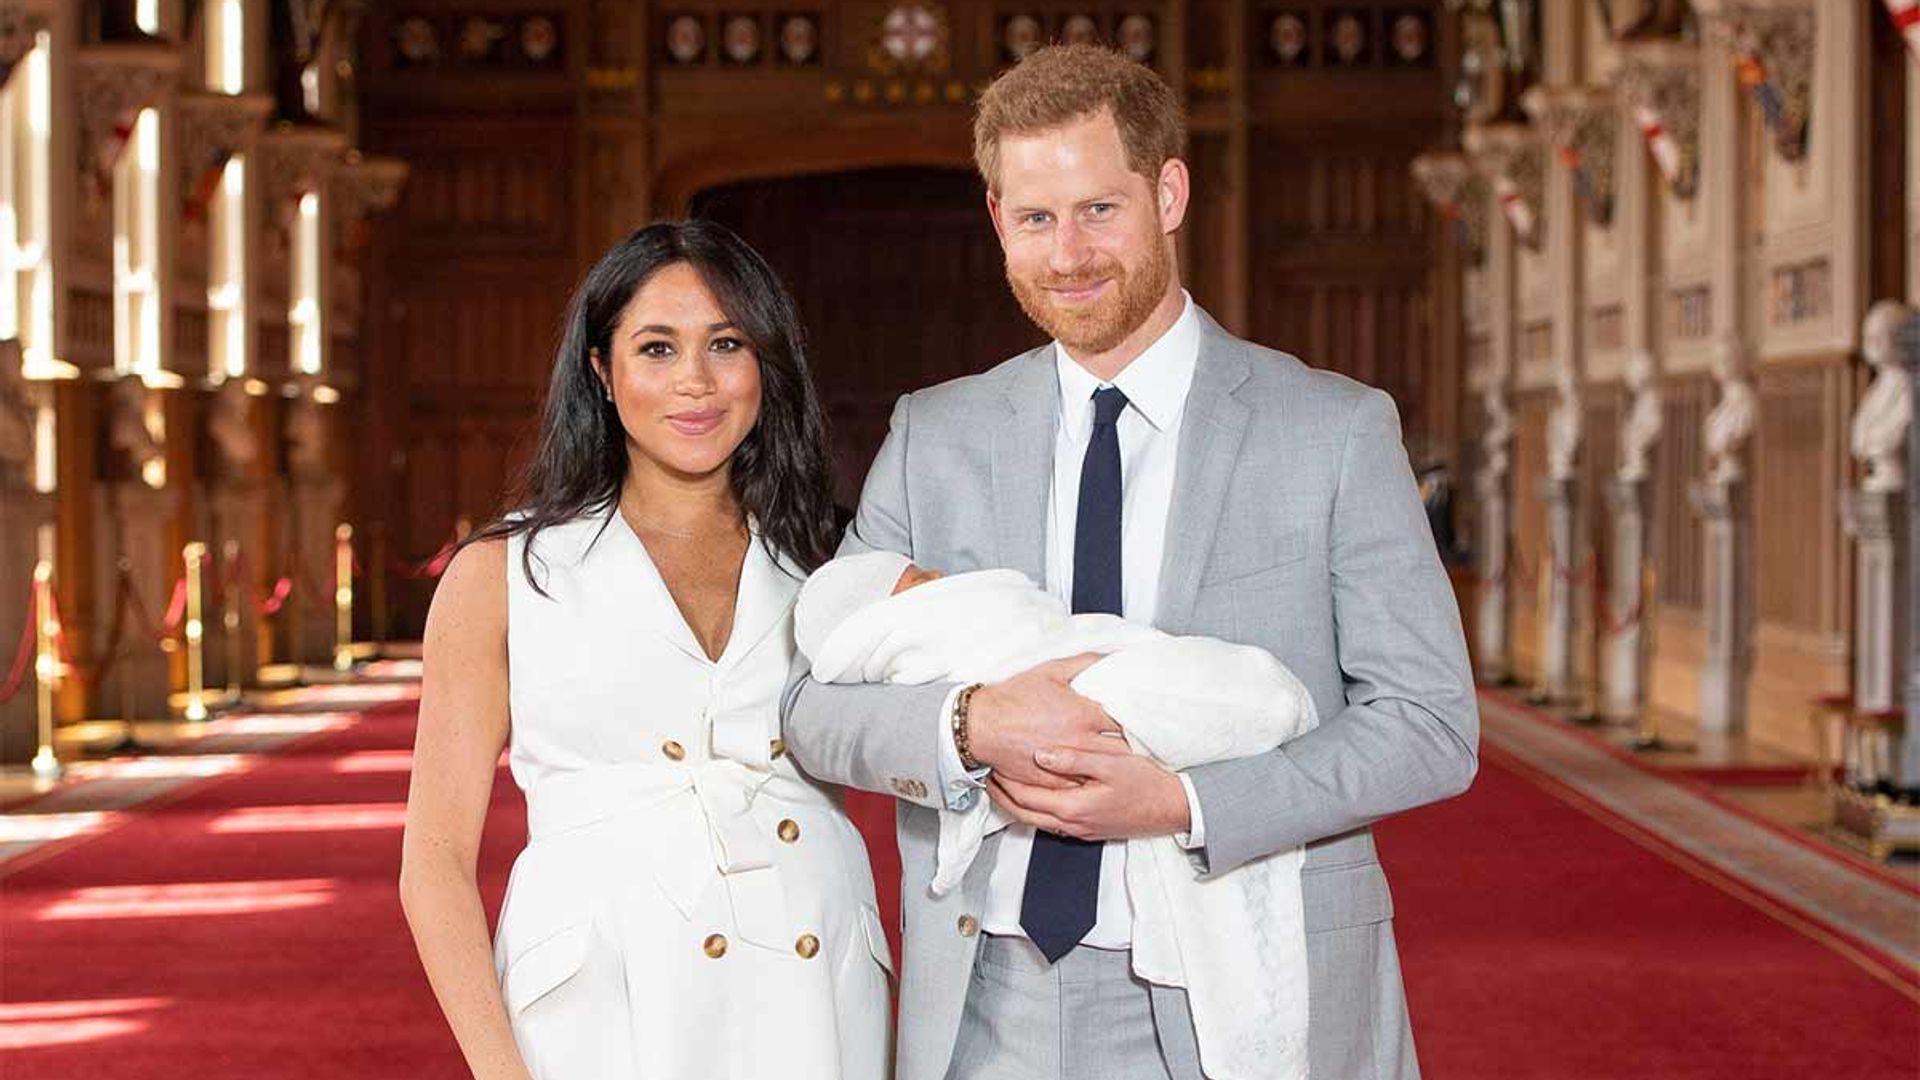 REVEALED: The royal baby's first outfit is as cute as we hoped